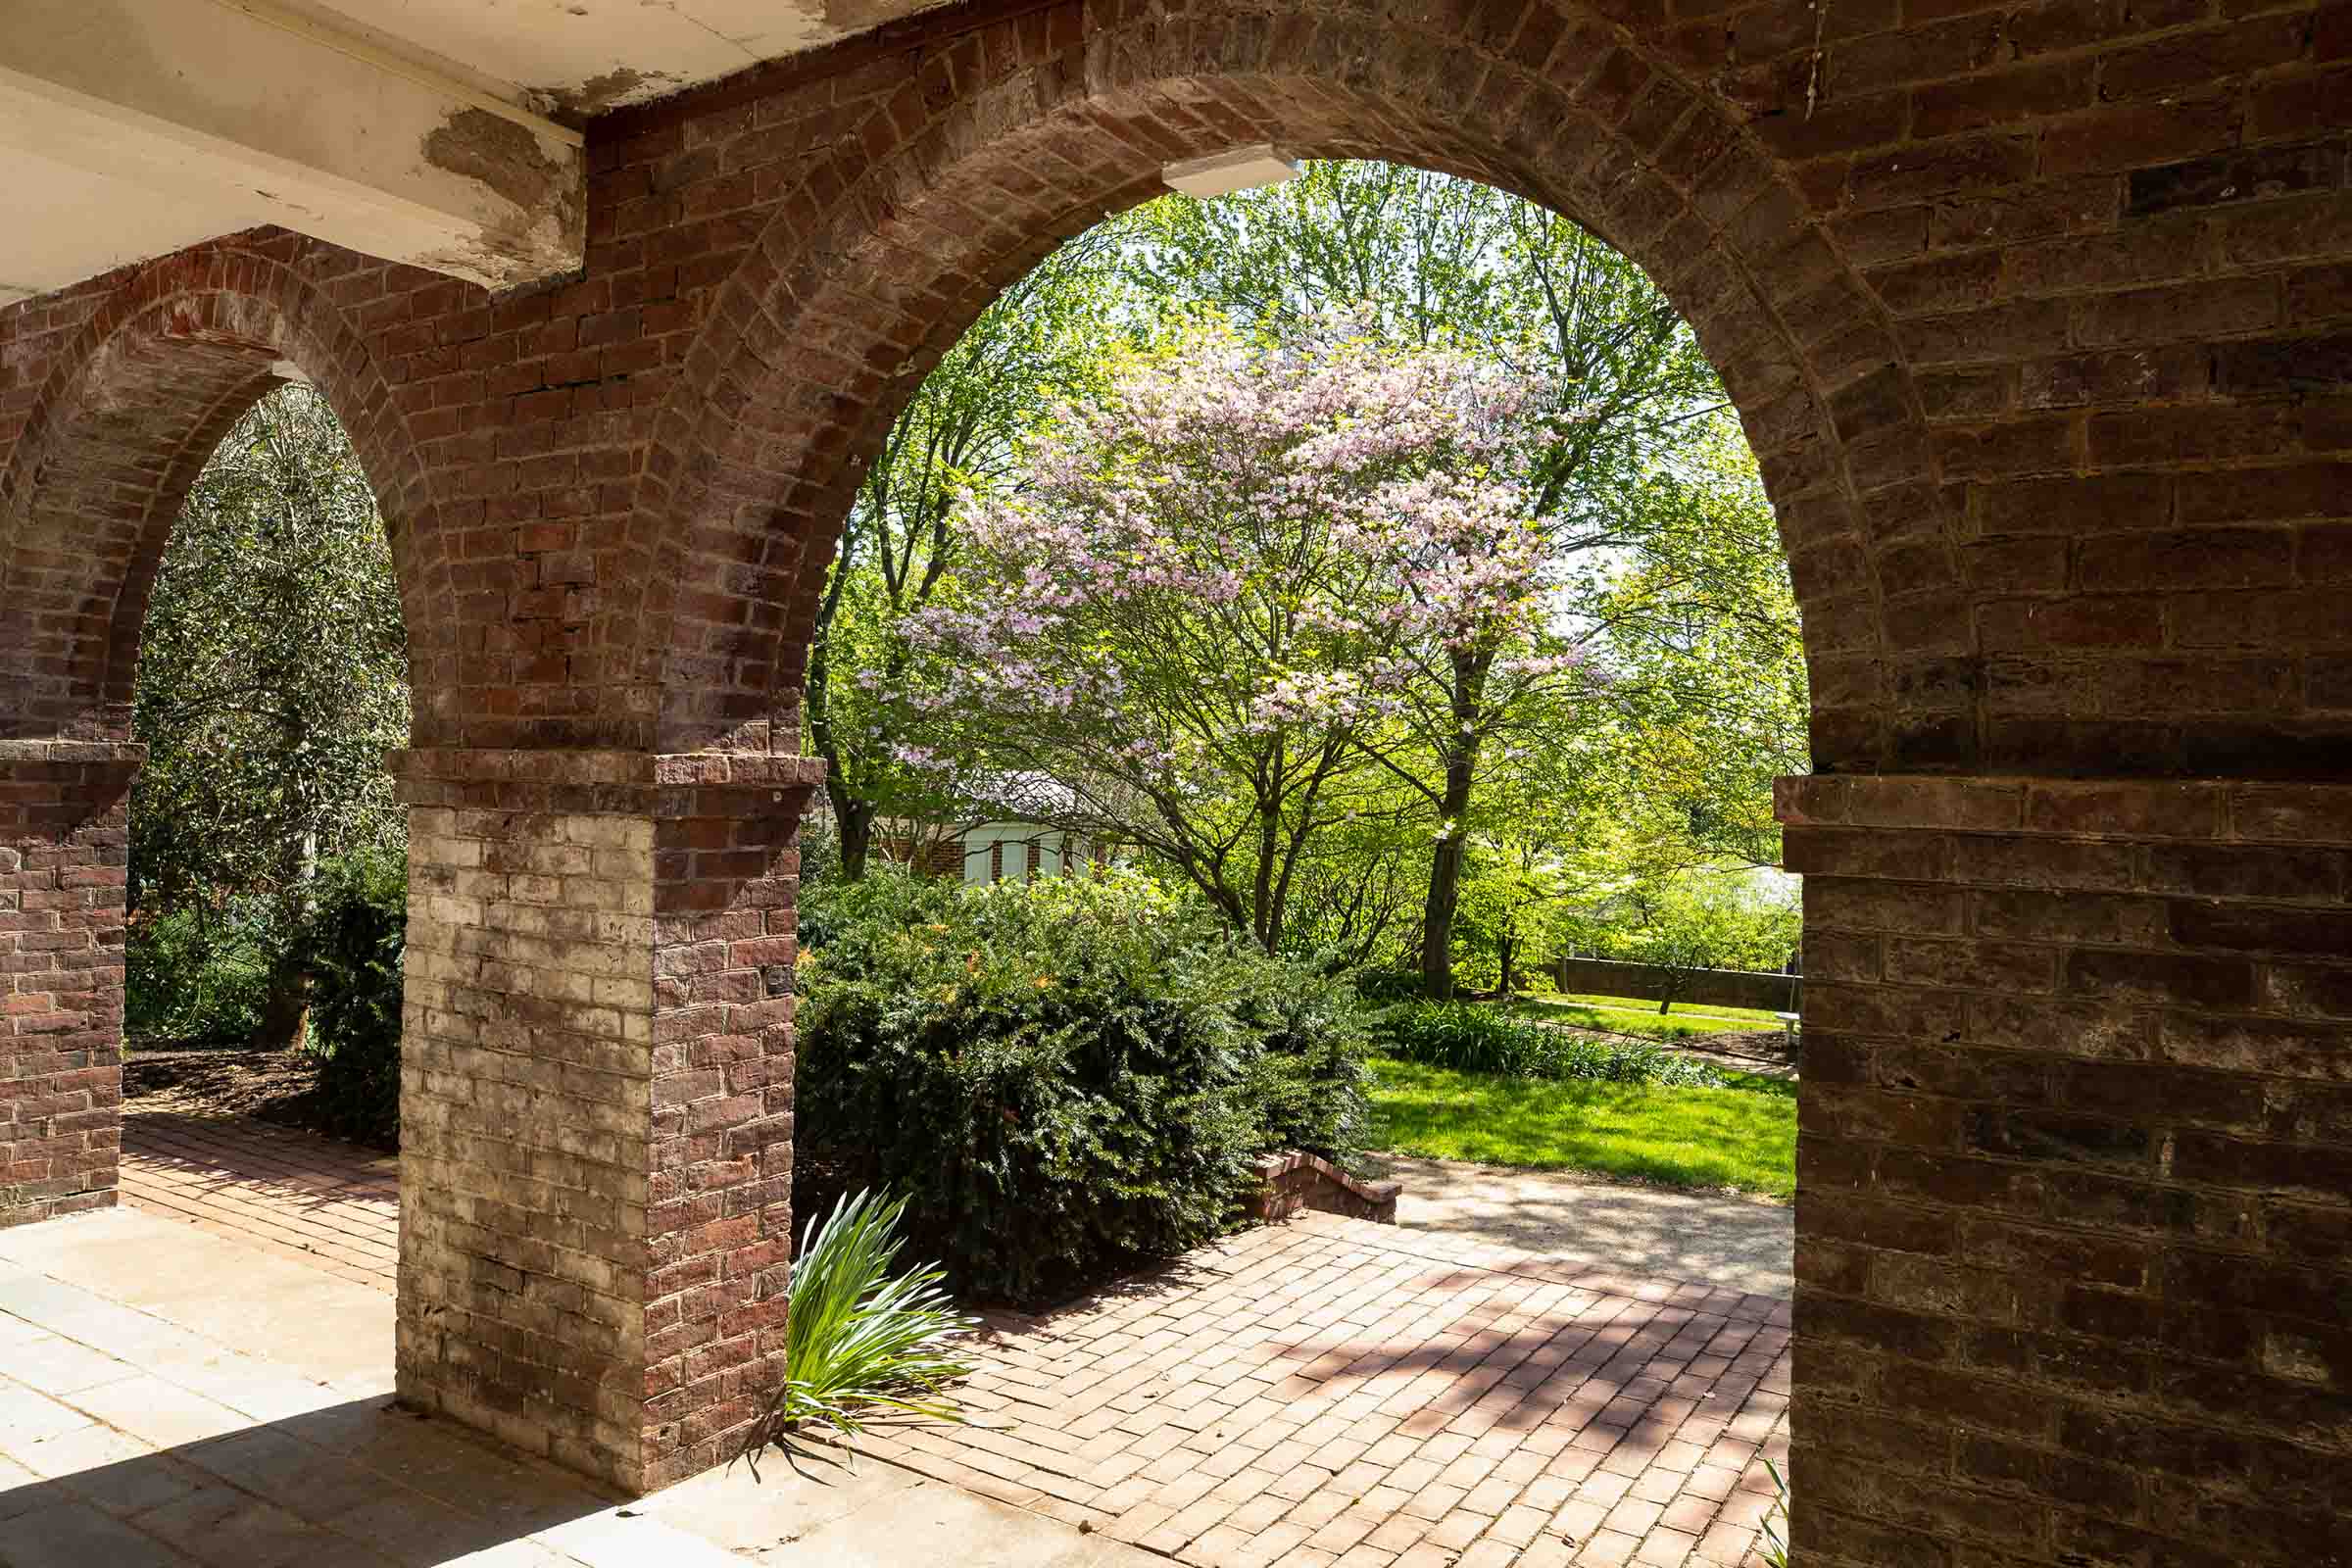 Brick Arched way looking into a flowering garden